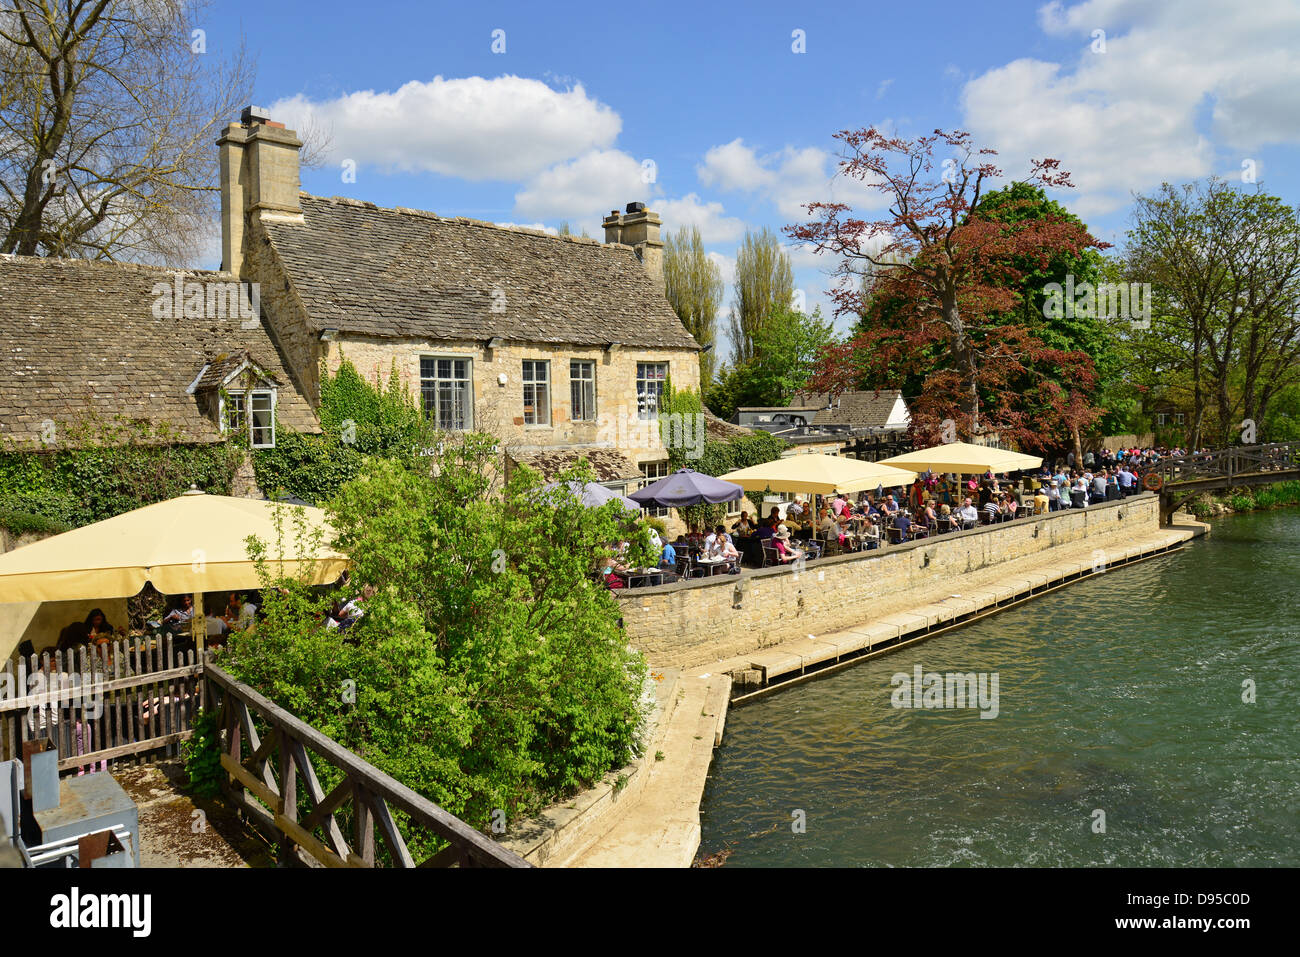 The Trout Inn, Lower Wolvercote, Oxford, Oxfordshire, England, United Kingdom Stock Photo